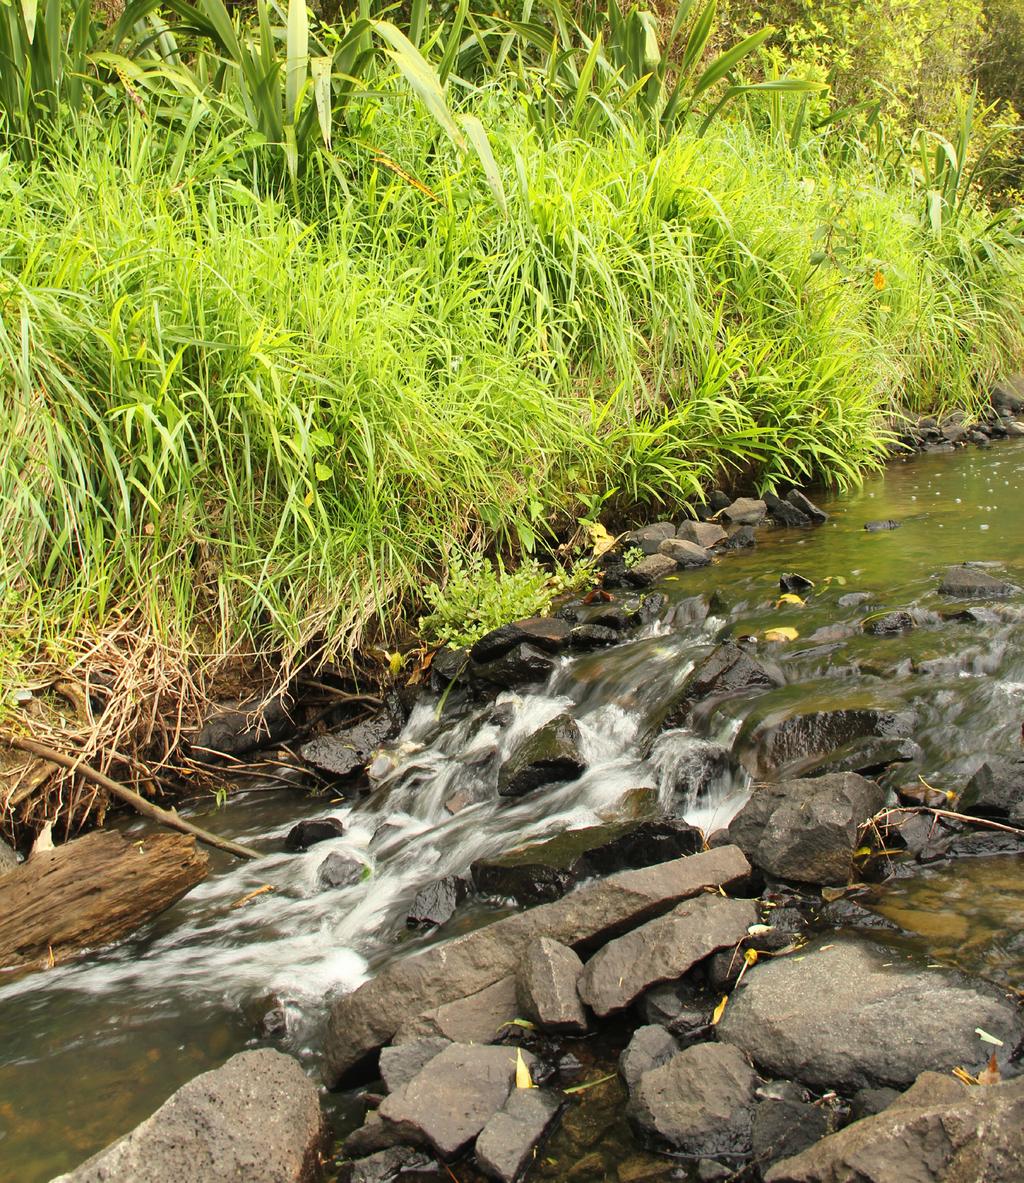 Working with nature to manage your stream Issued by Auckland Council March 2013 If you have any questions about this information sheet please contact Auckland Council on 09 301 0101 A stream in a